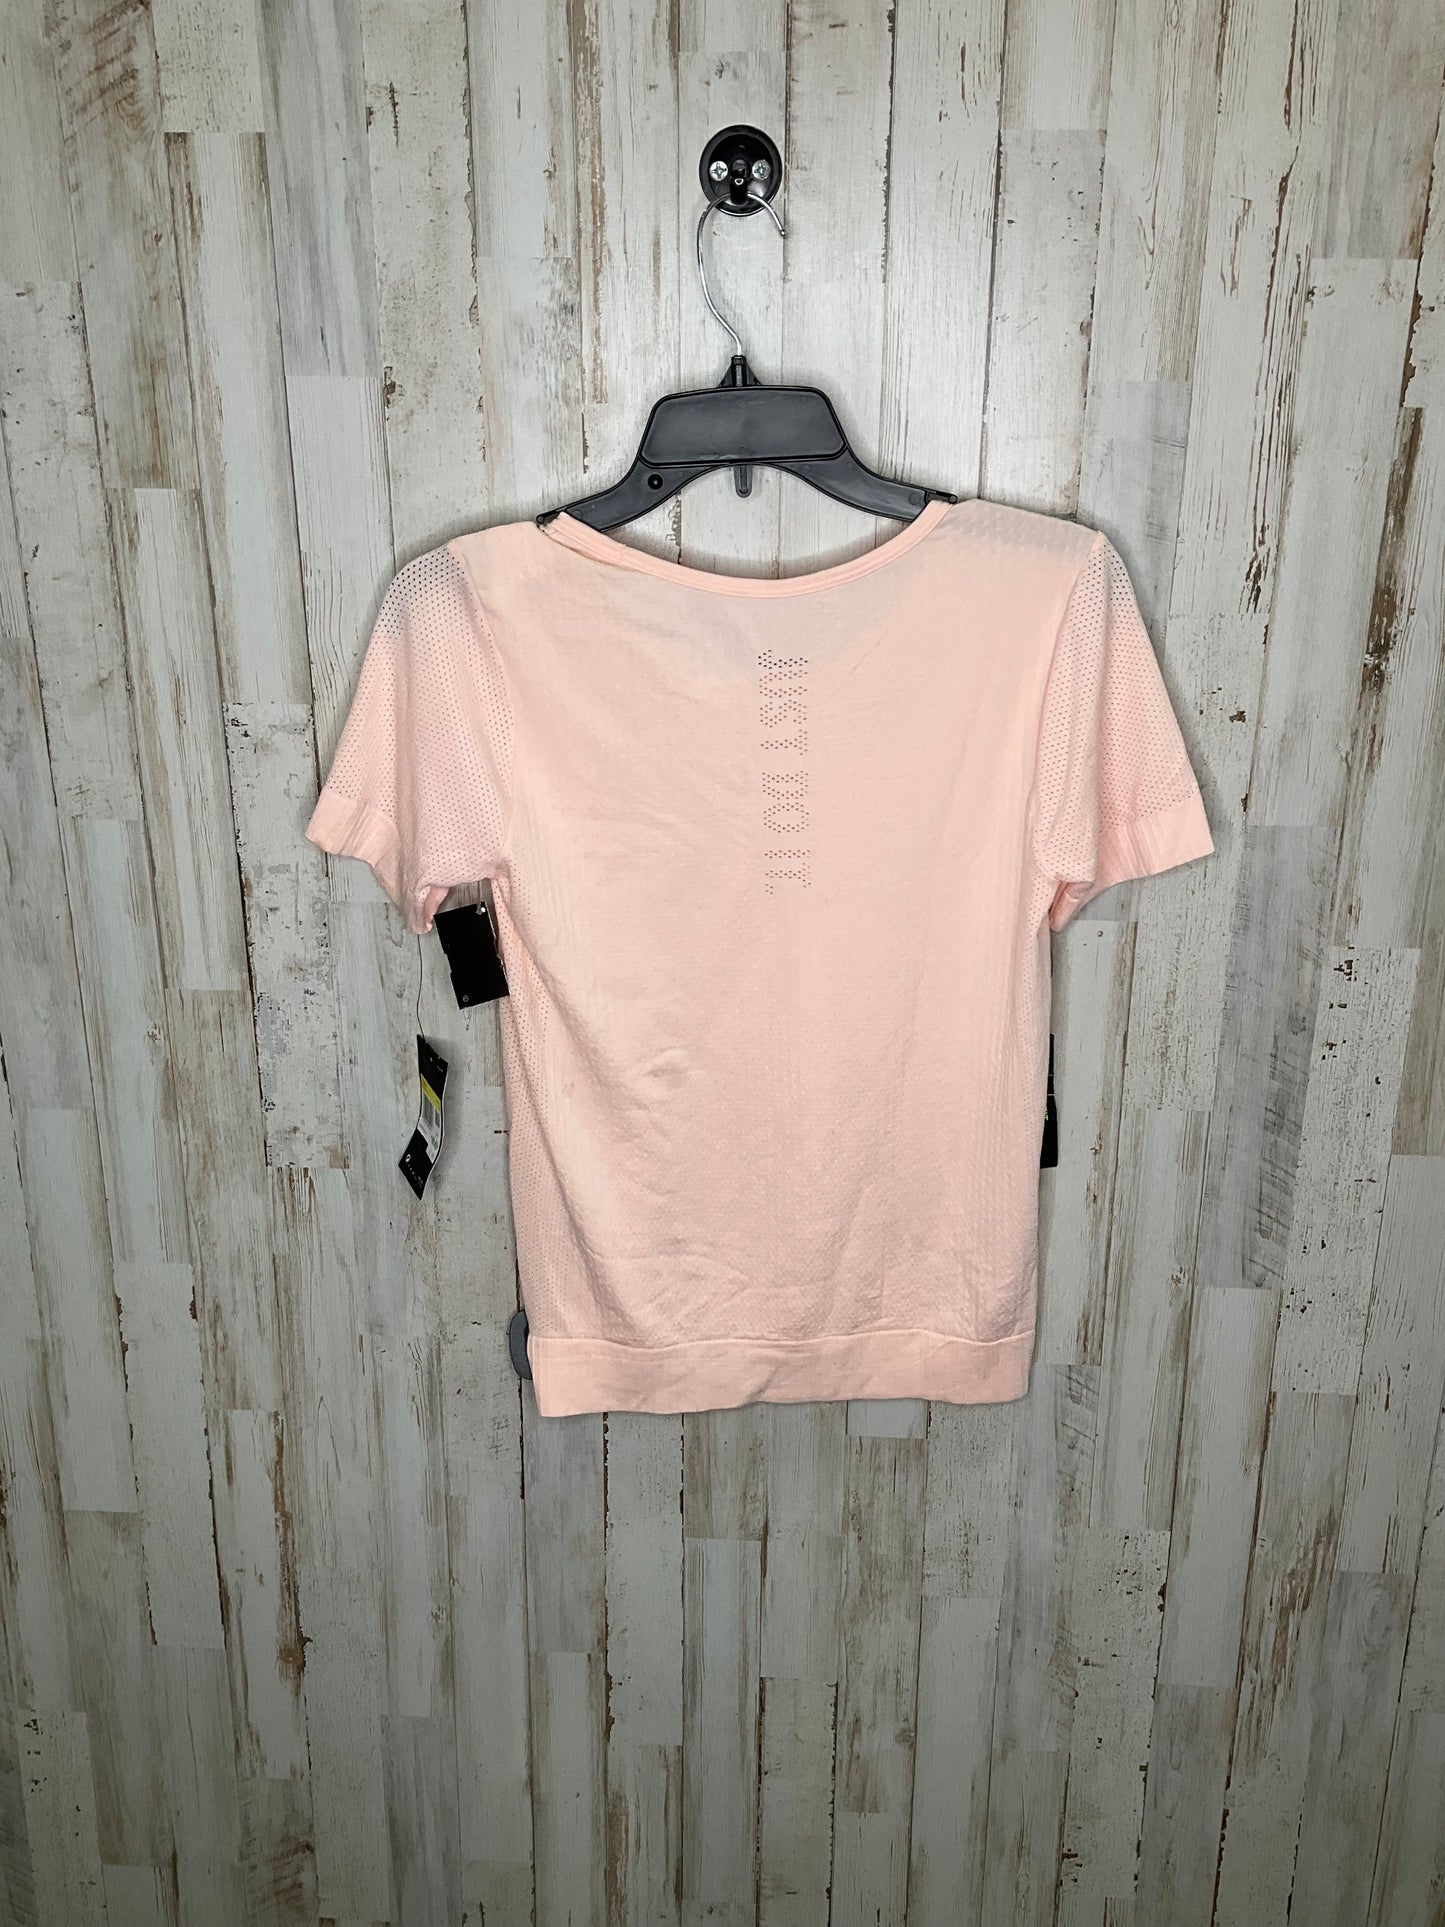 Peach Athletic Top Short Sleeve Nike, Size S